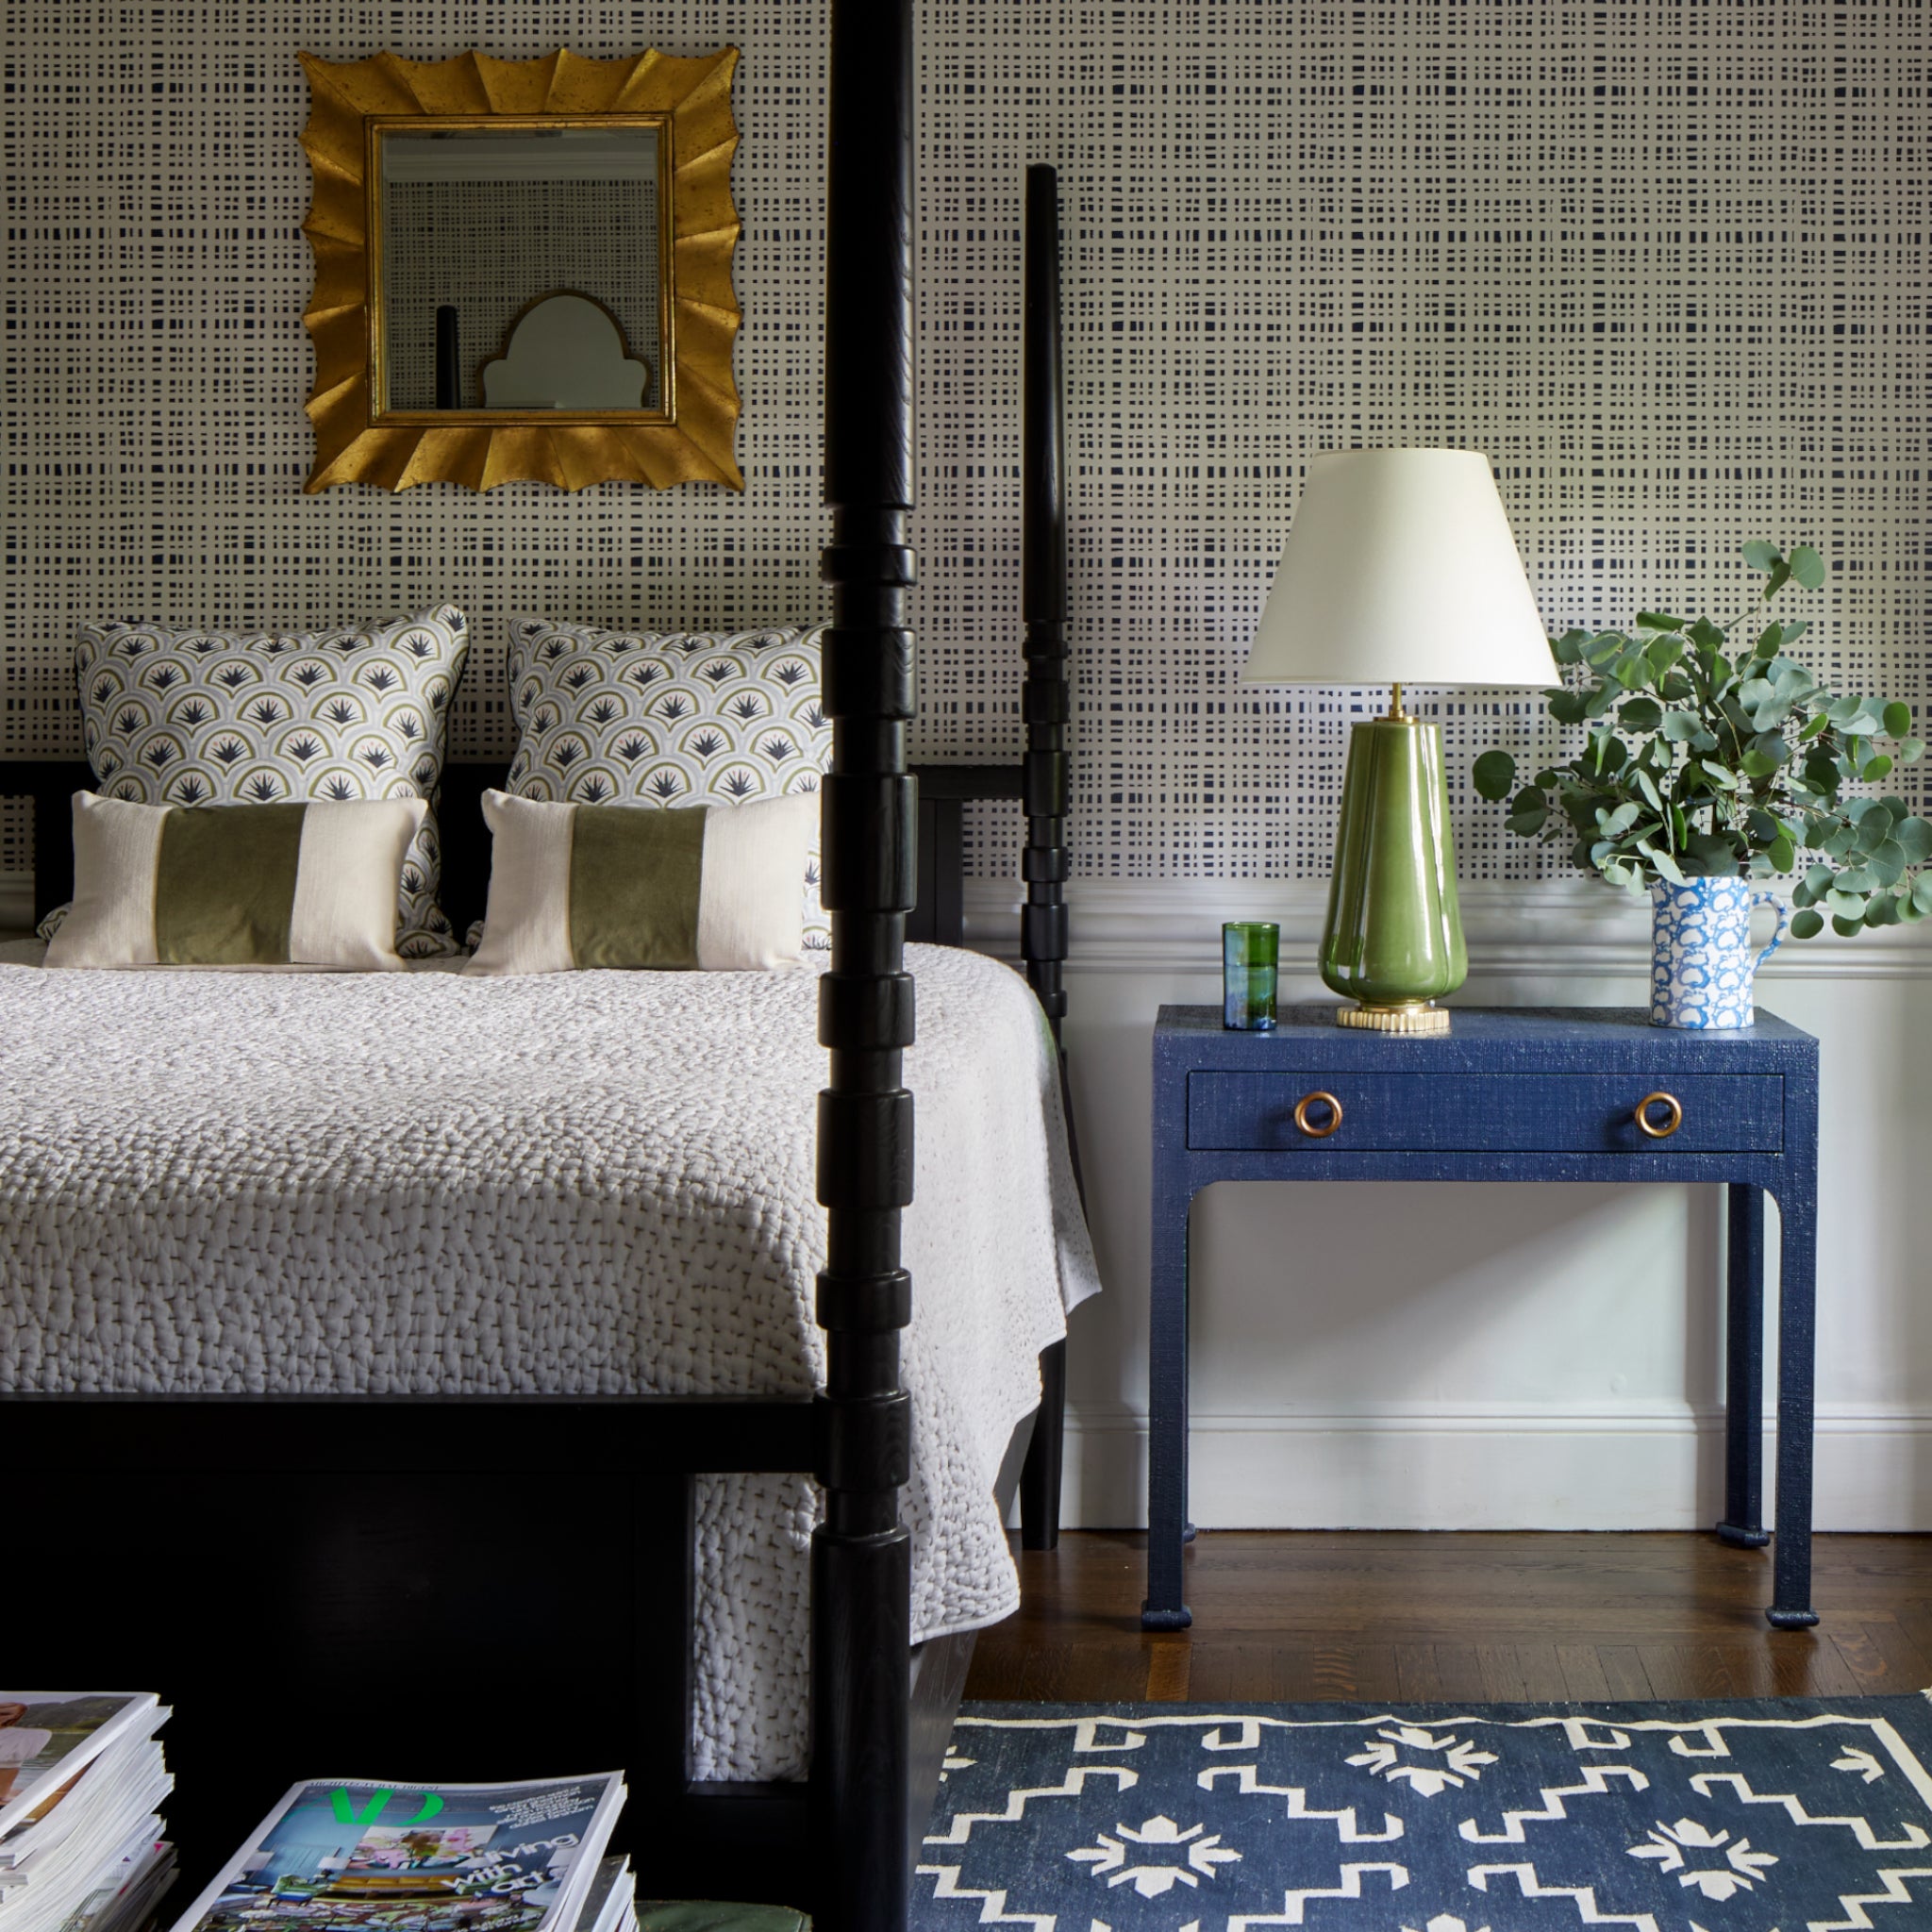 Bedroom styled with two Art Deco Palm Pattern printed pillows and two white and green lumbars on white bed next to blue table with lamp and plants in vase on top over a navy gingham printed wallpaper